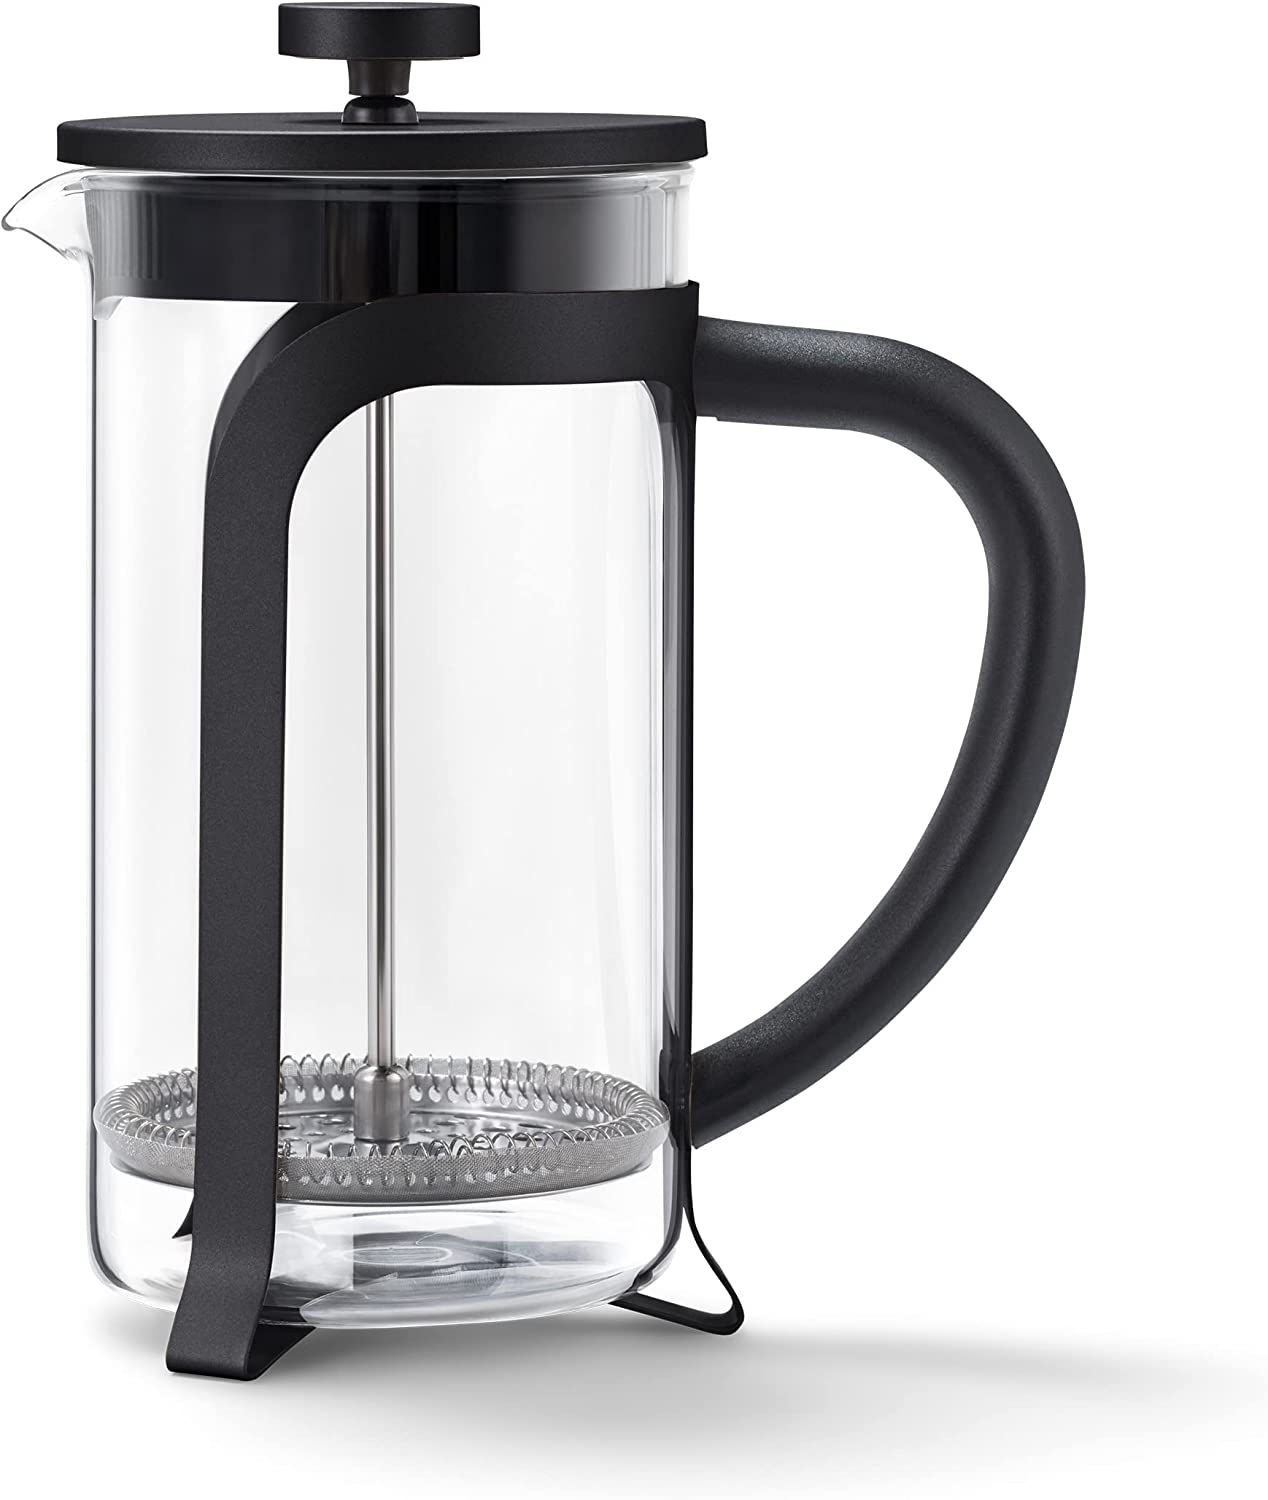 Tchibo Strainer Stamp Jug for Manual Coffee Preparation, French Press with Heat-Resistant Borosilicate Glass, Dishwasher Safe, 800 ml capacity for Approx. 6 cups, Stainless Steel, Black